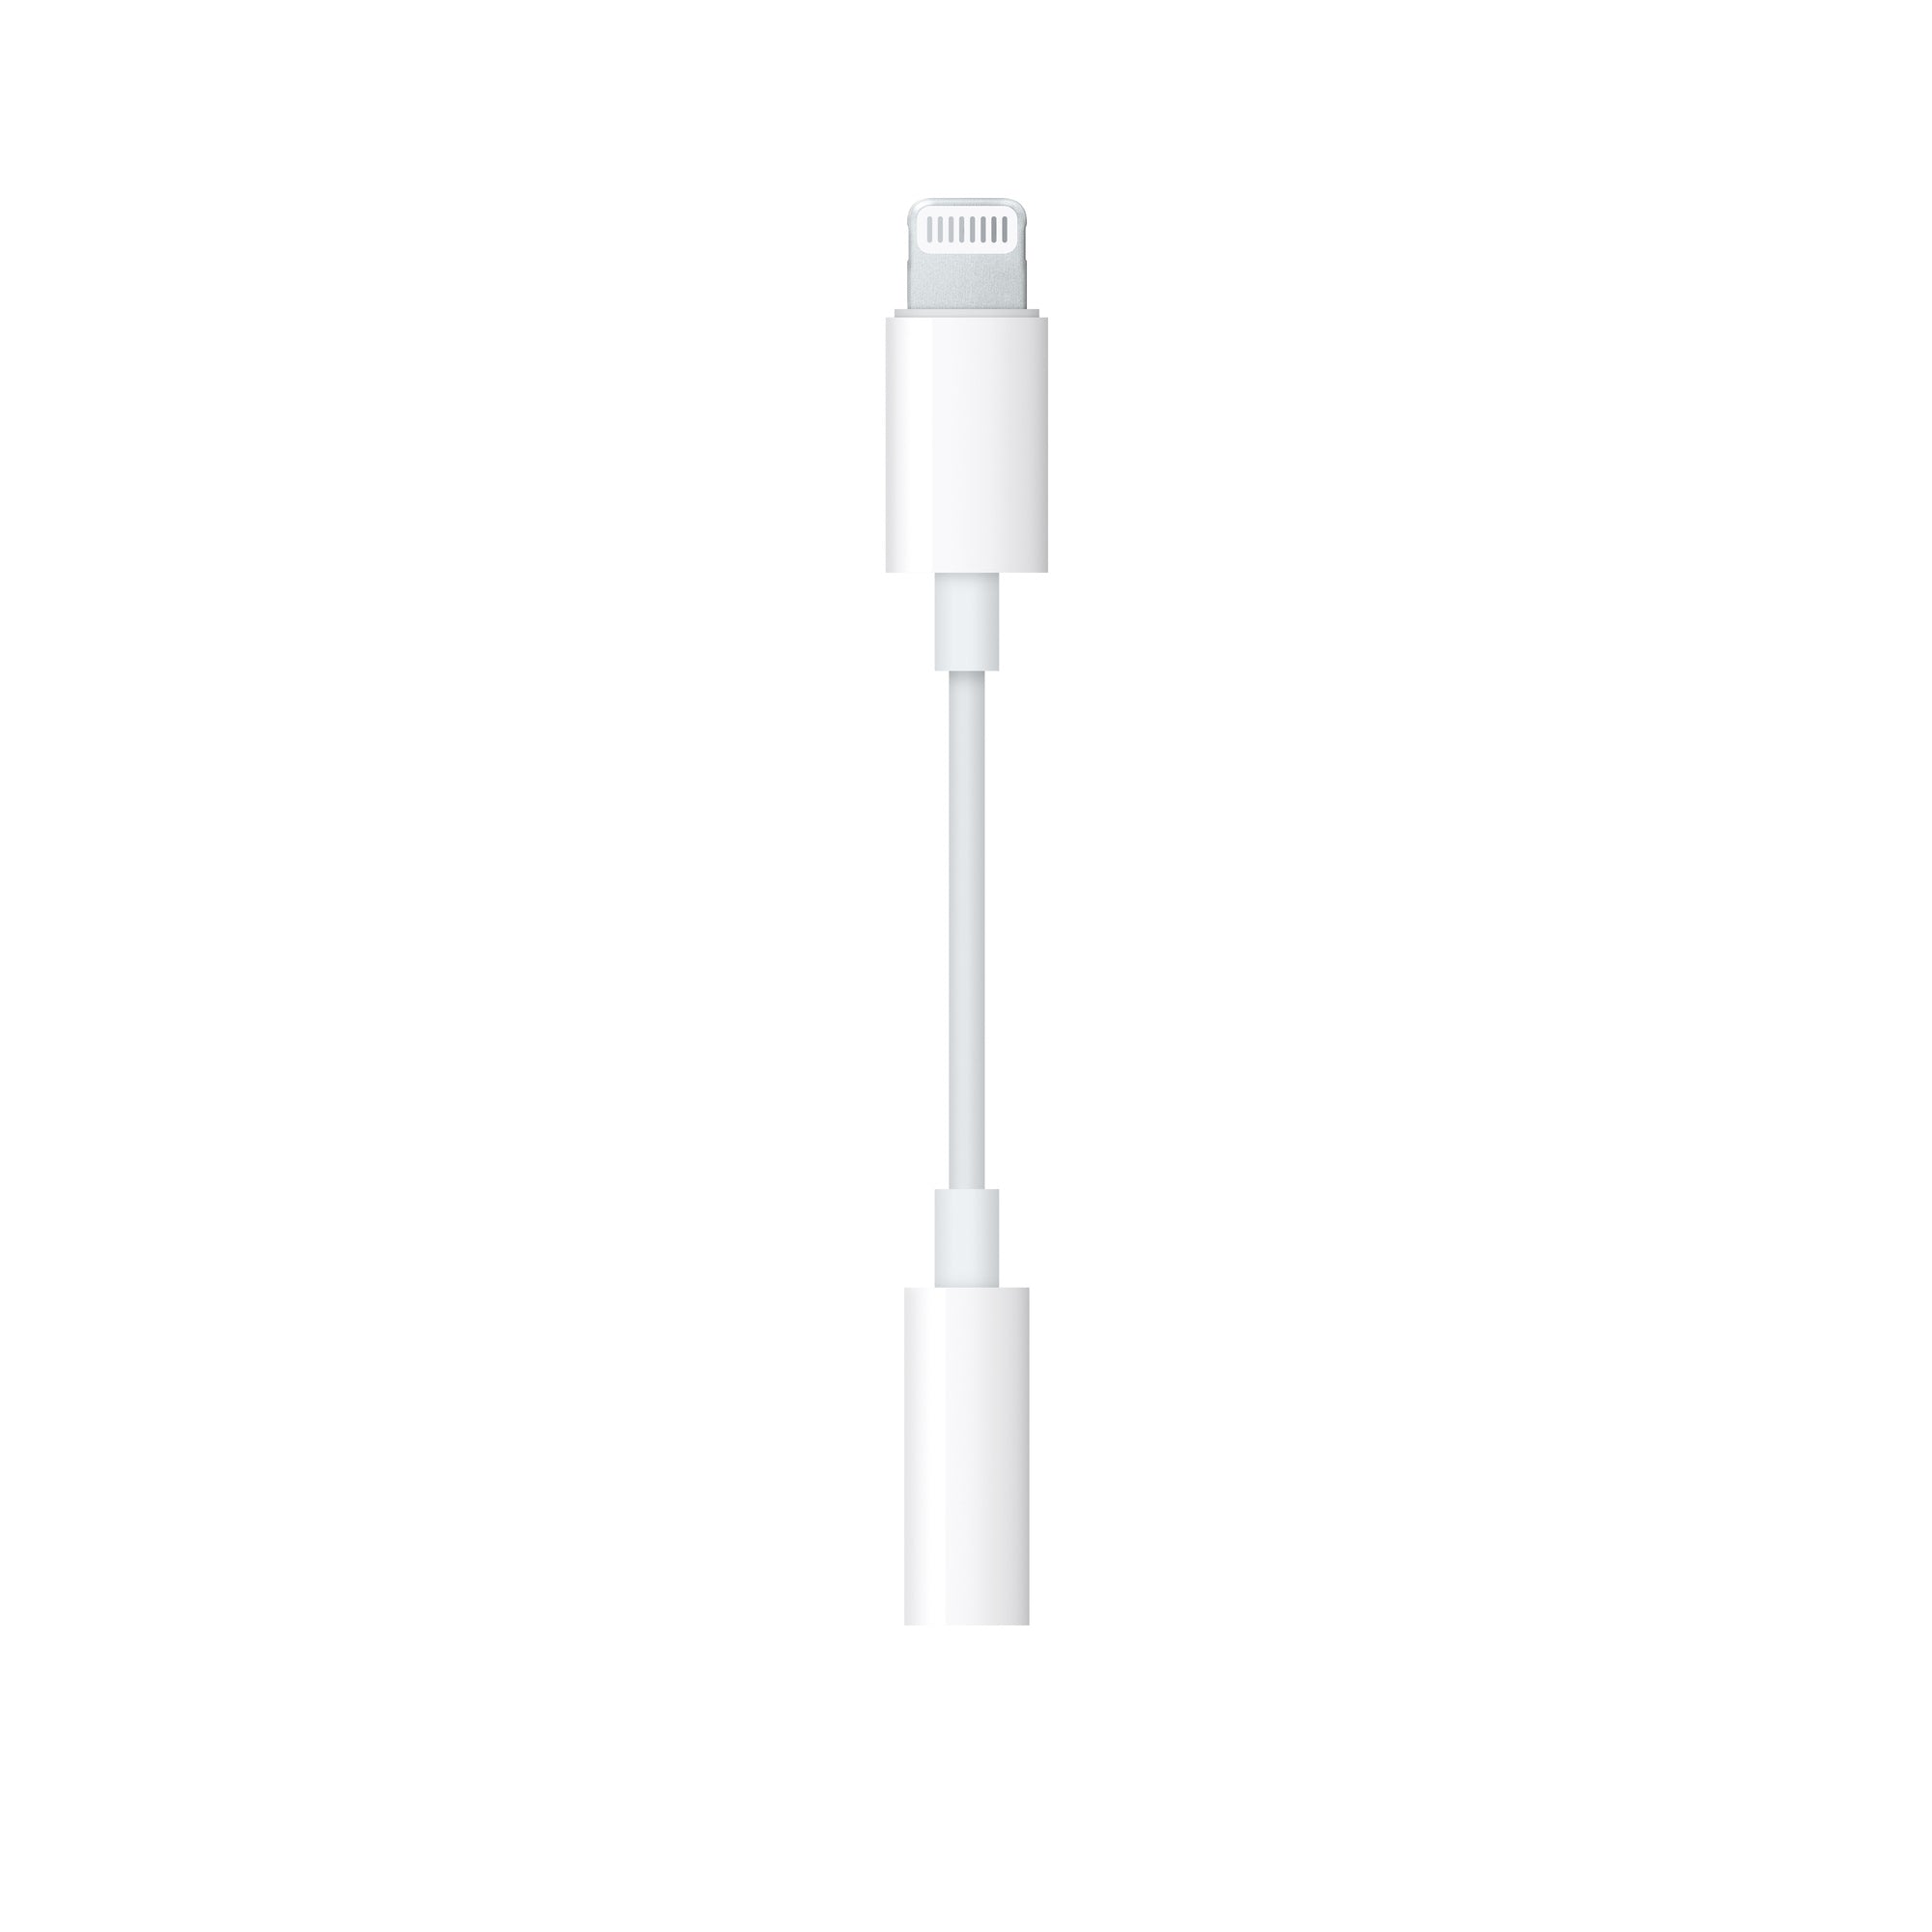 Apple iPhone 6 Heaphone Jack Connector (Lightning to 3.5mm)